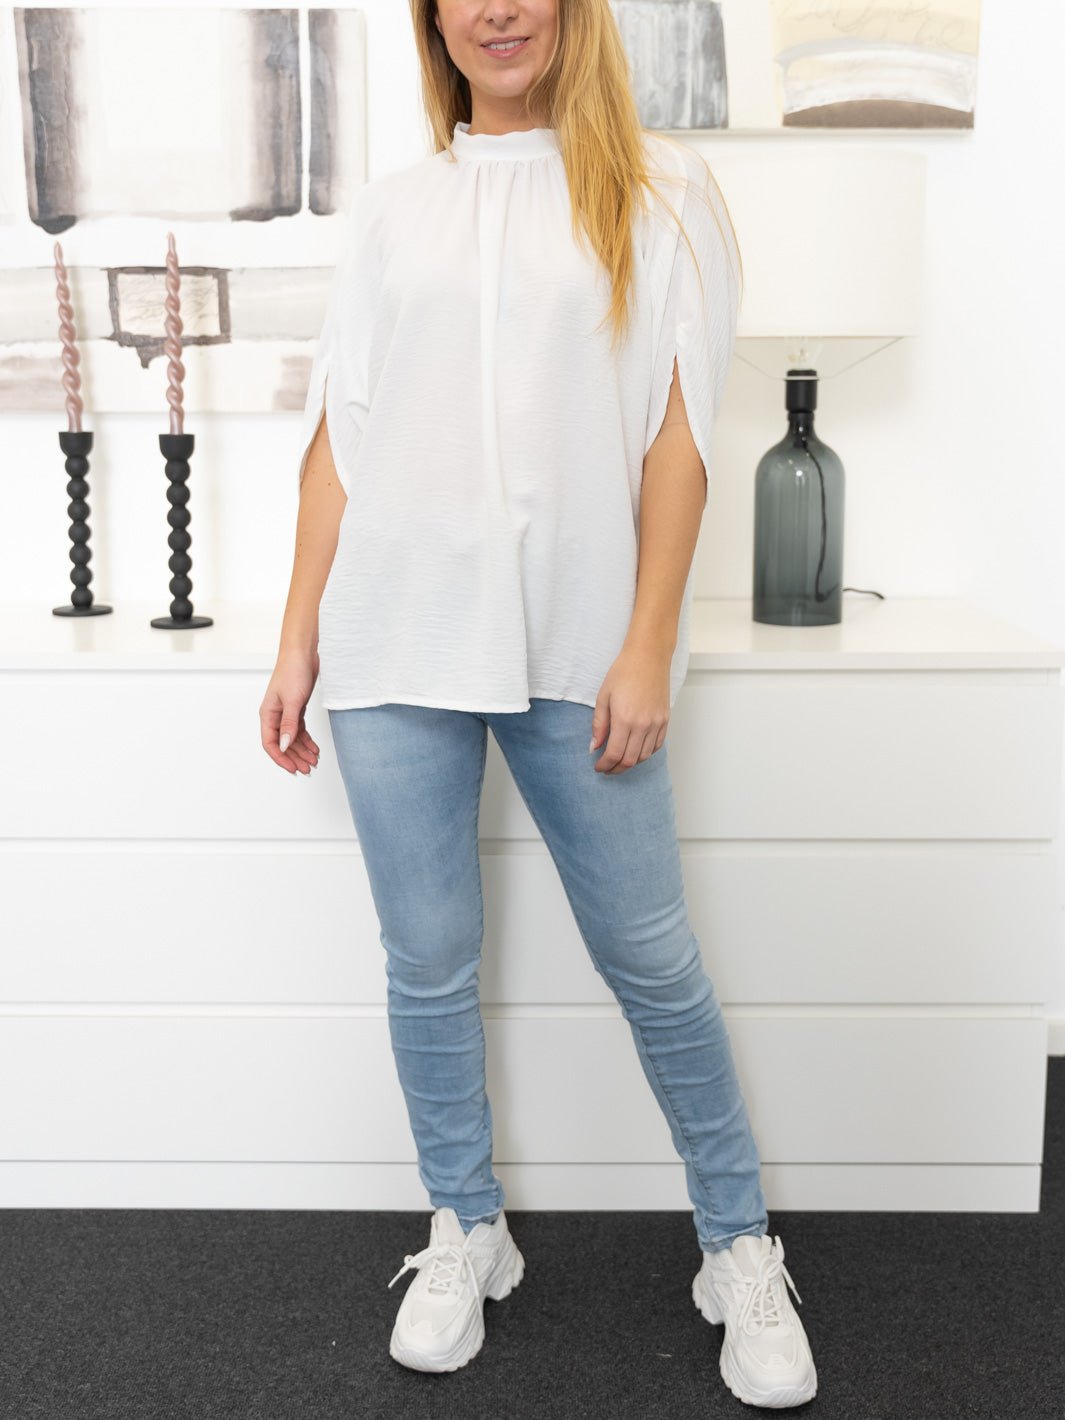 All Week Anni bluse white - Online-Mode